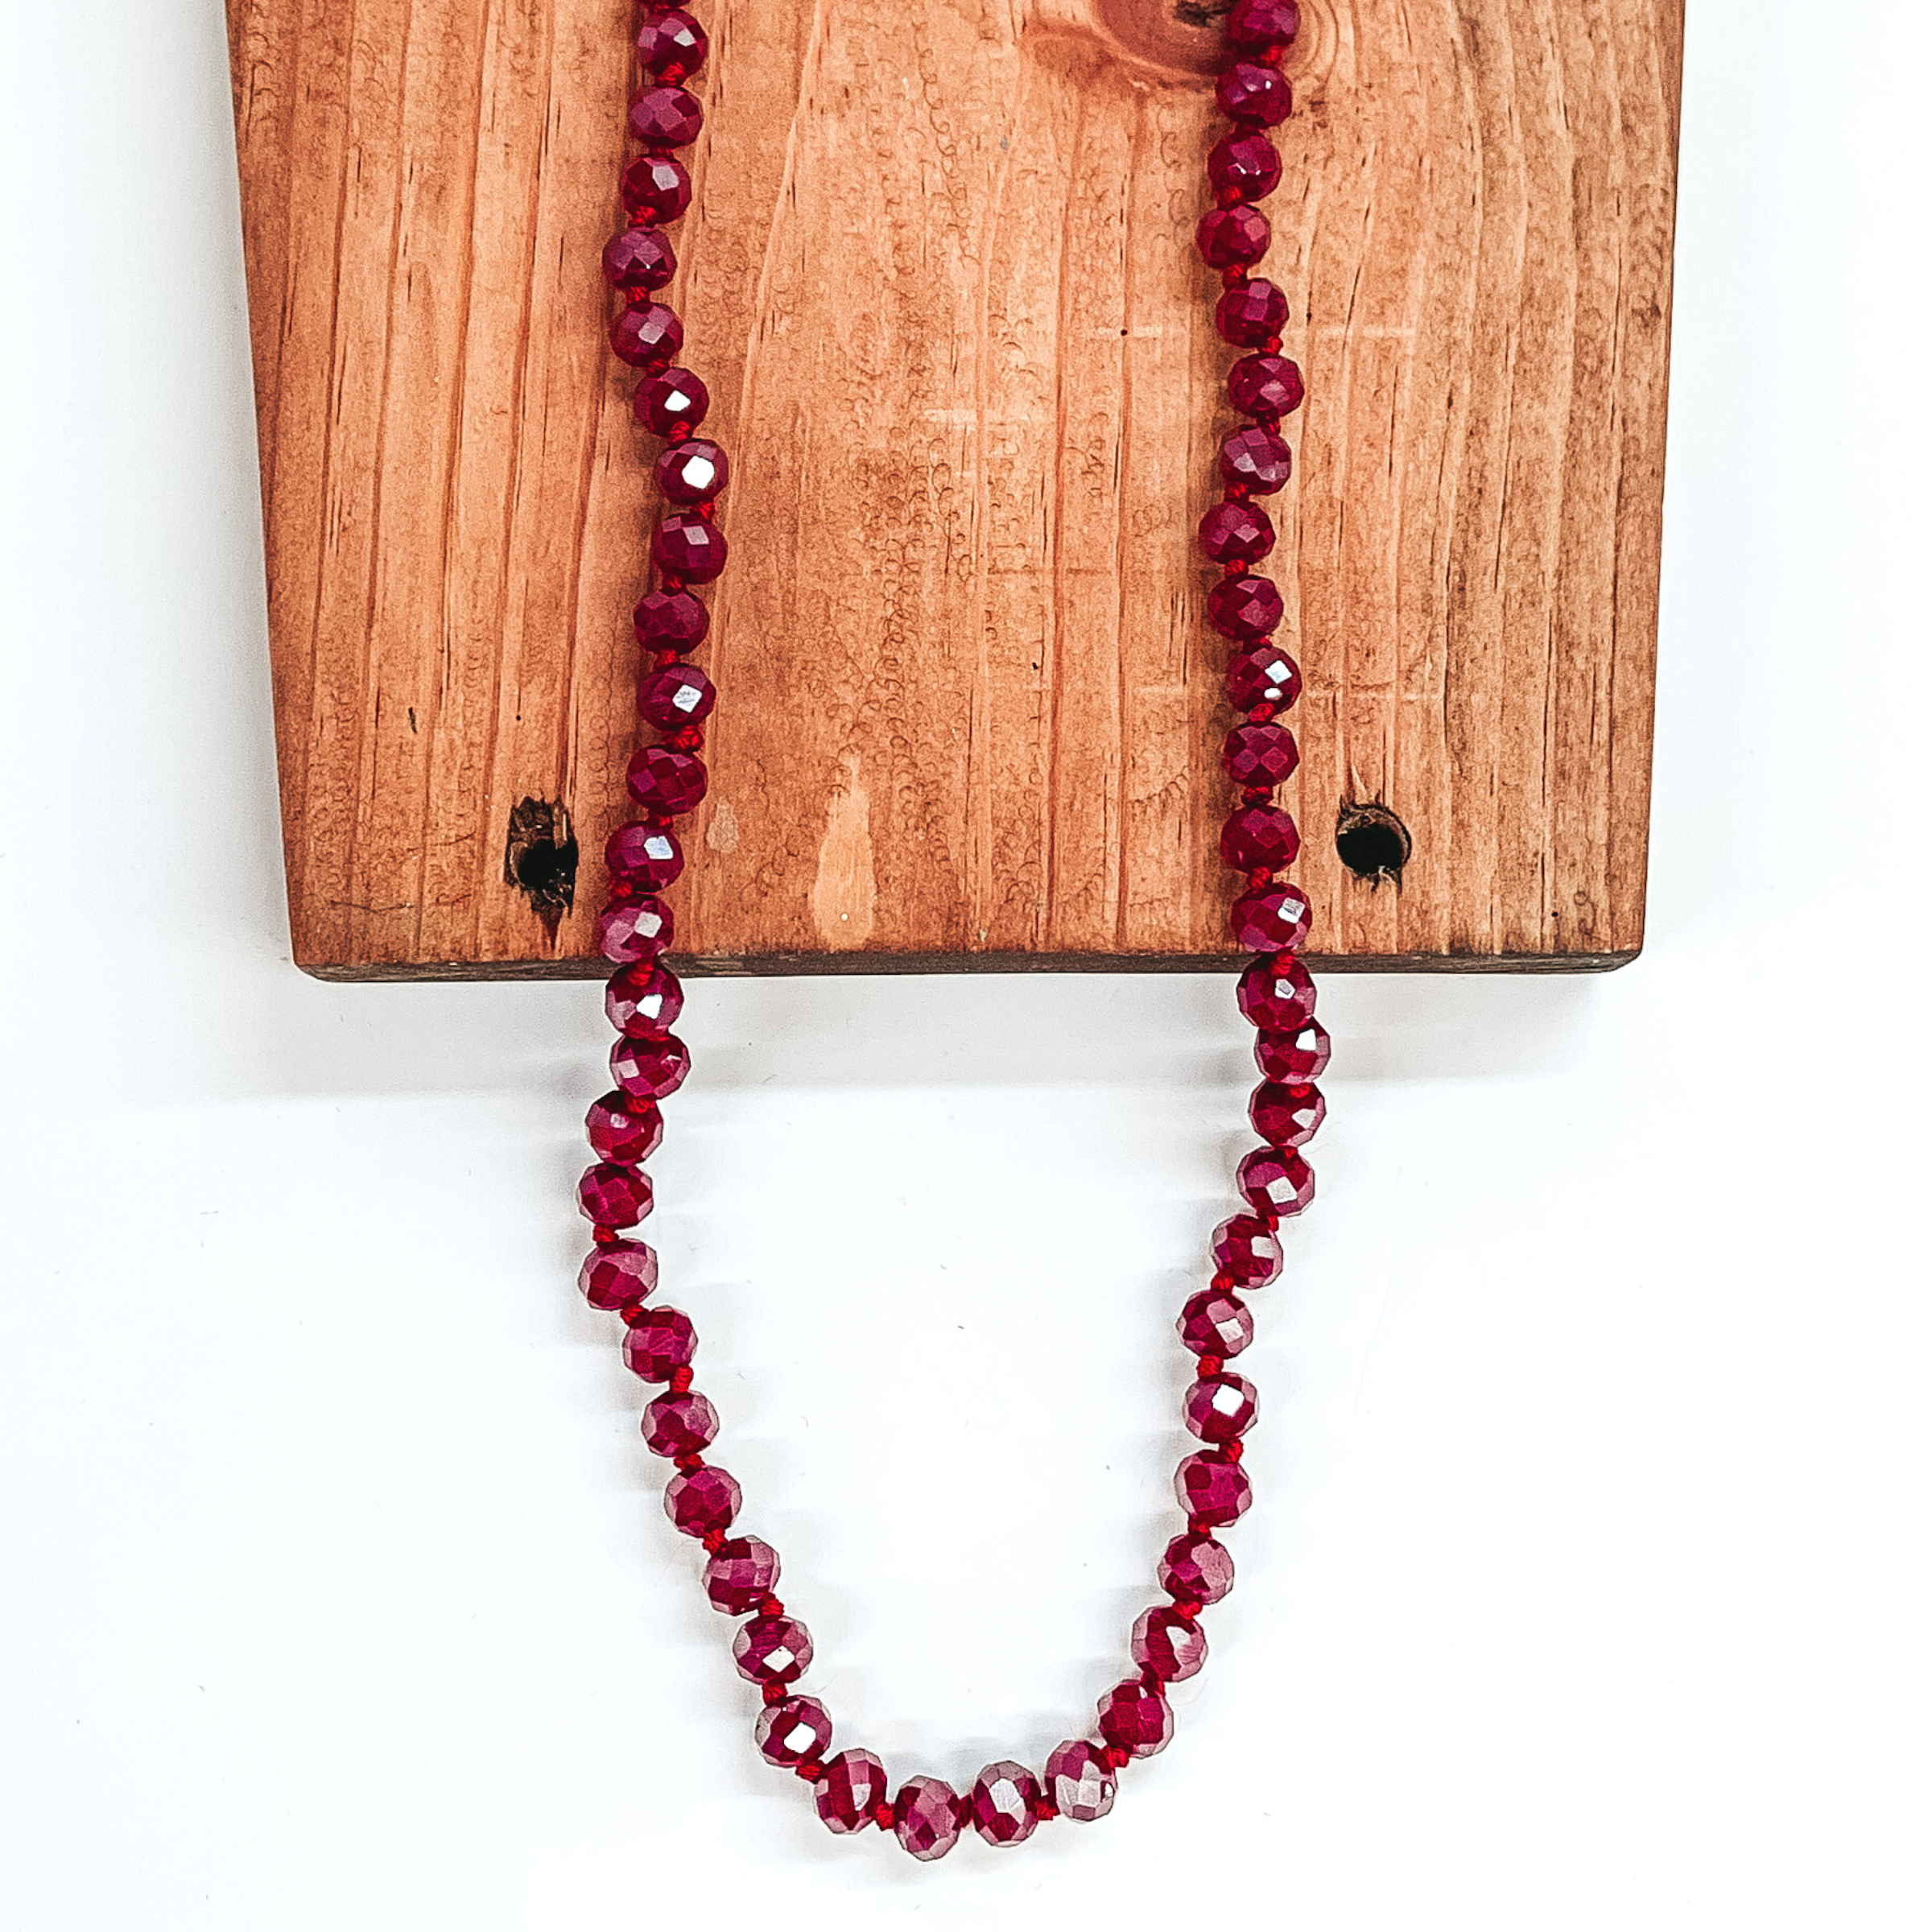 Garnet AB crystal beaded necklace. This necklace is laying on top of a brown block on a white background.